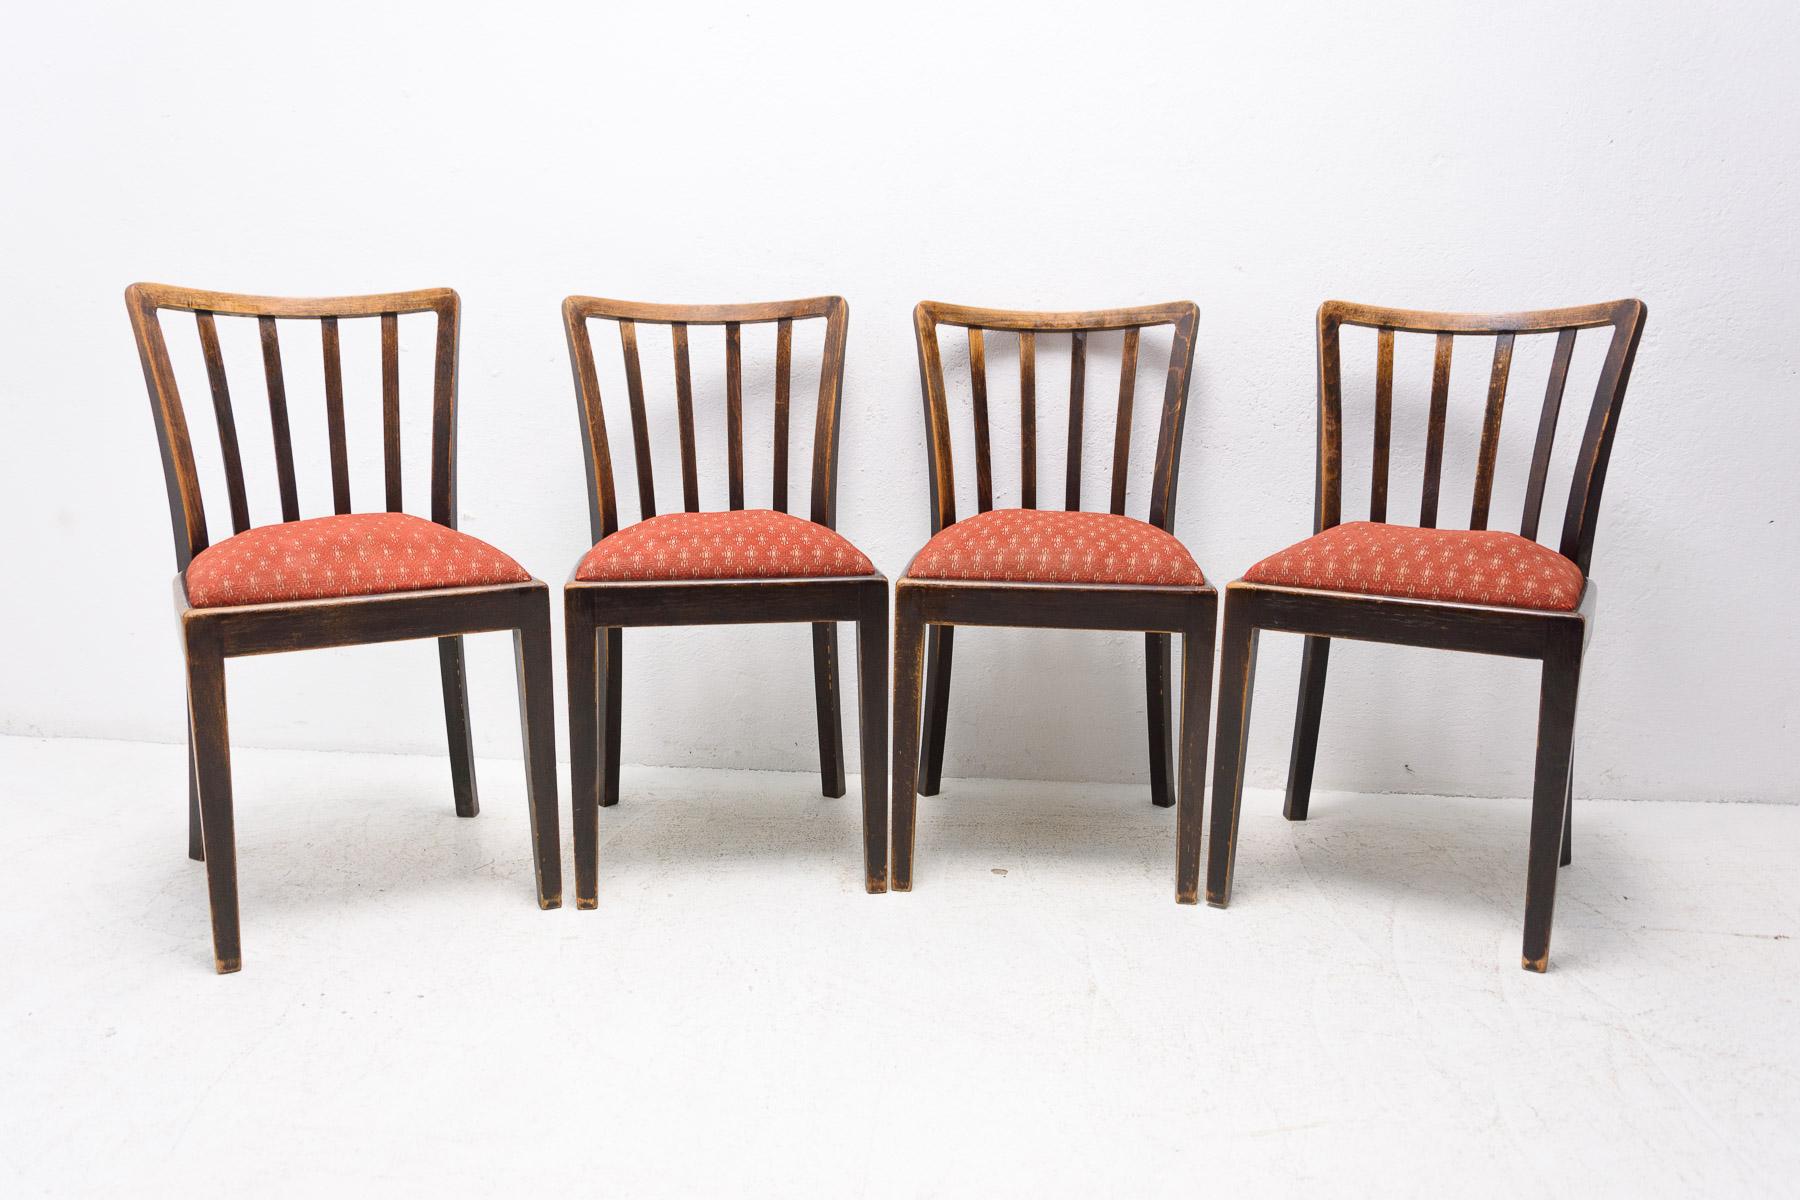 Set of four dining chairs by Thonet, these were made in the former Czechoslovakia in the 1950's . Made of beech wood and upholstered in fabric. The chairs are in good Vintage condition, with wear appropriate for the age of chairs. Marked Thonet.